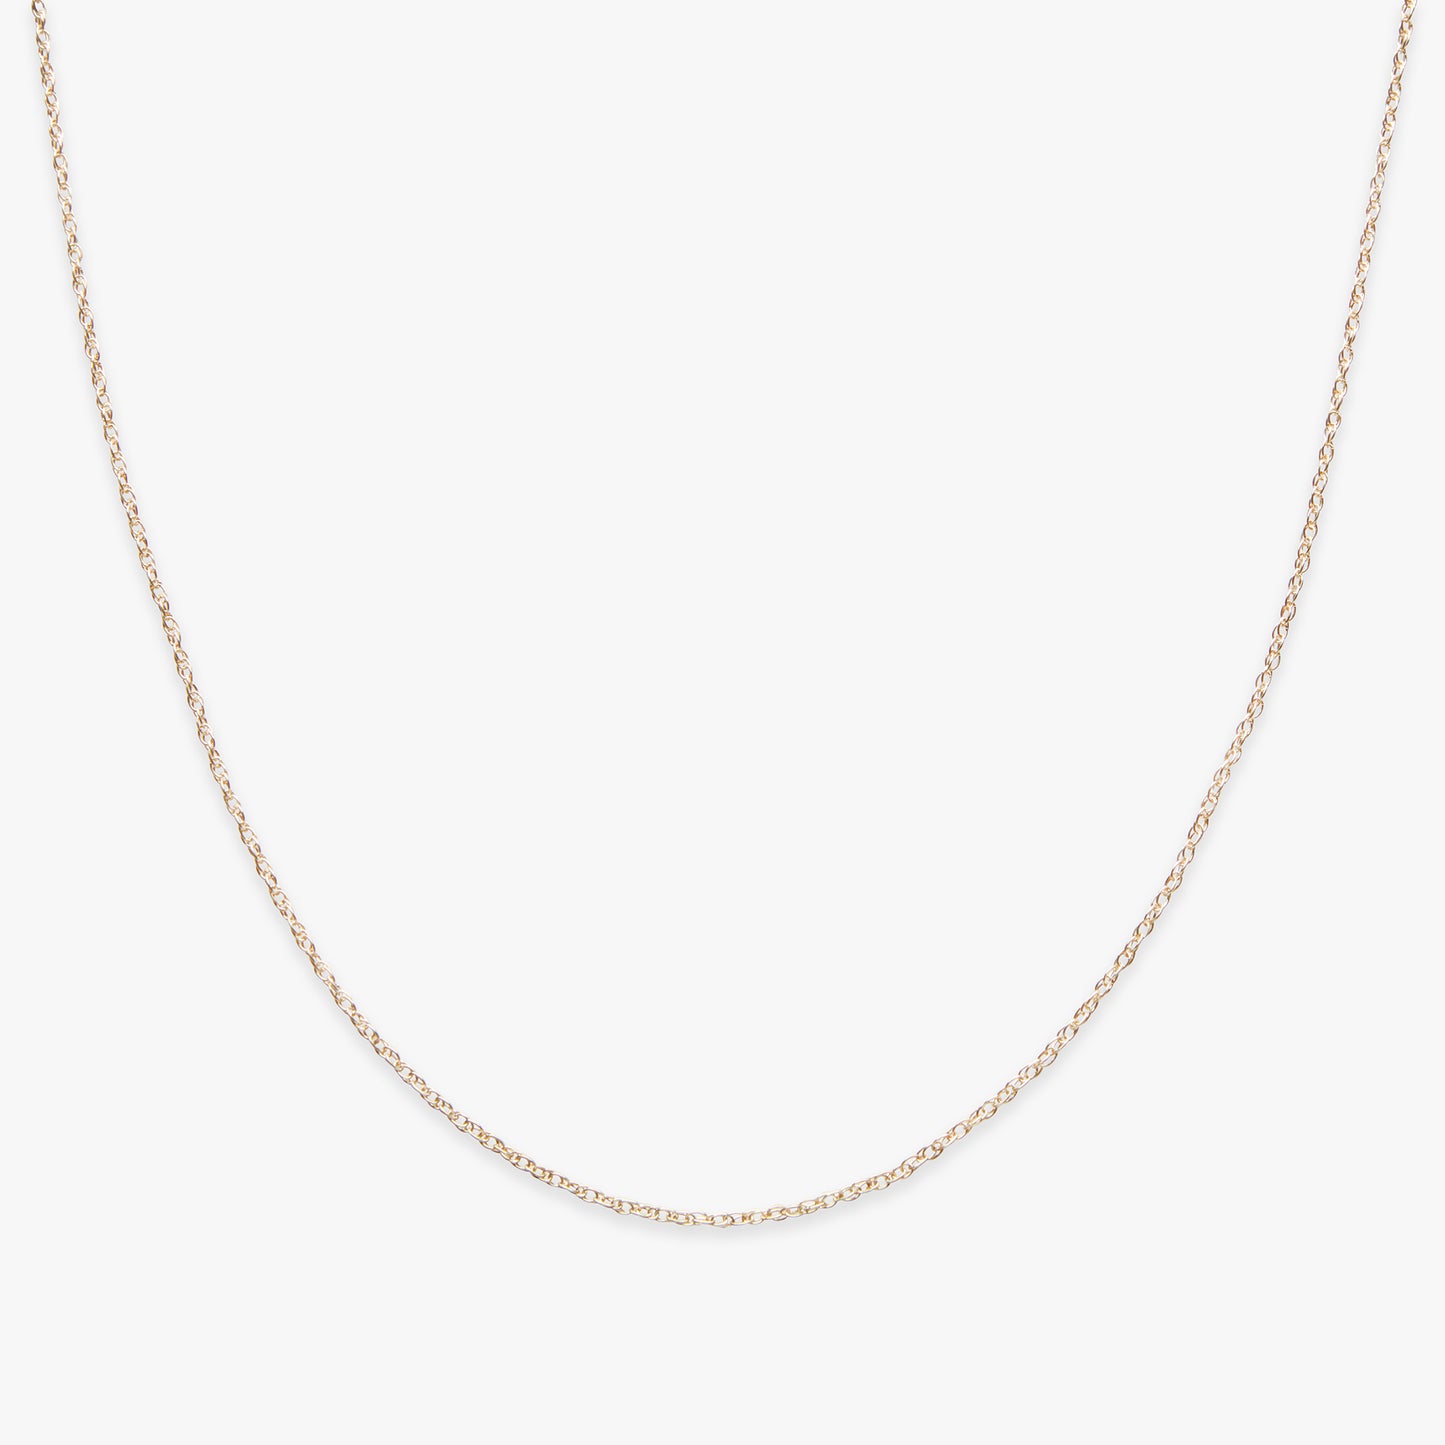 Basic twist chain necklace gold filled